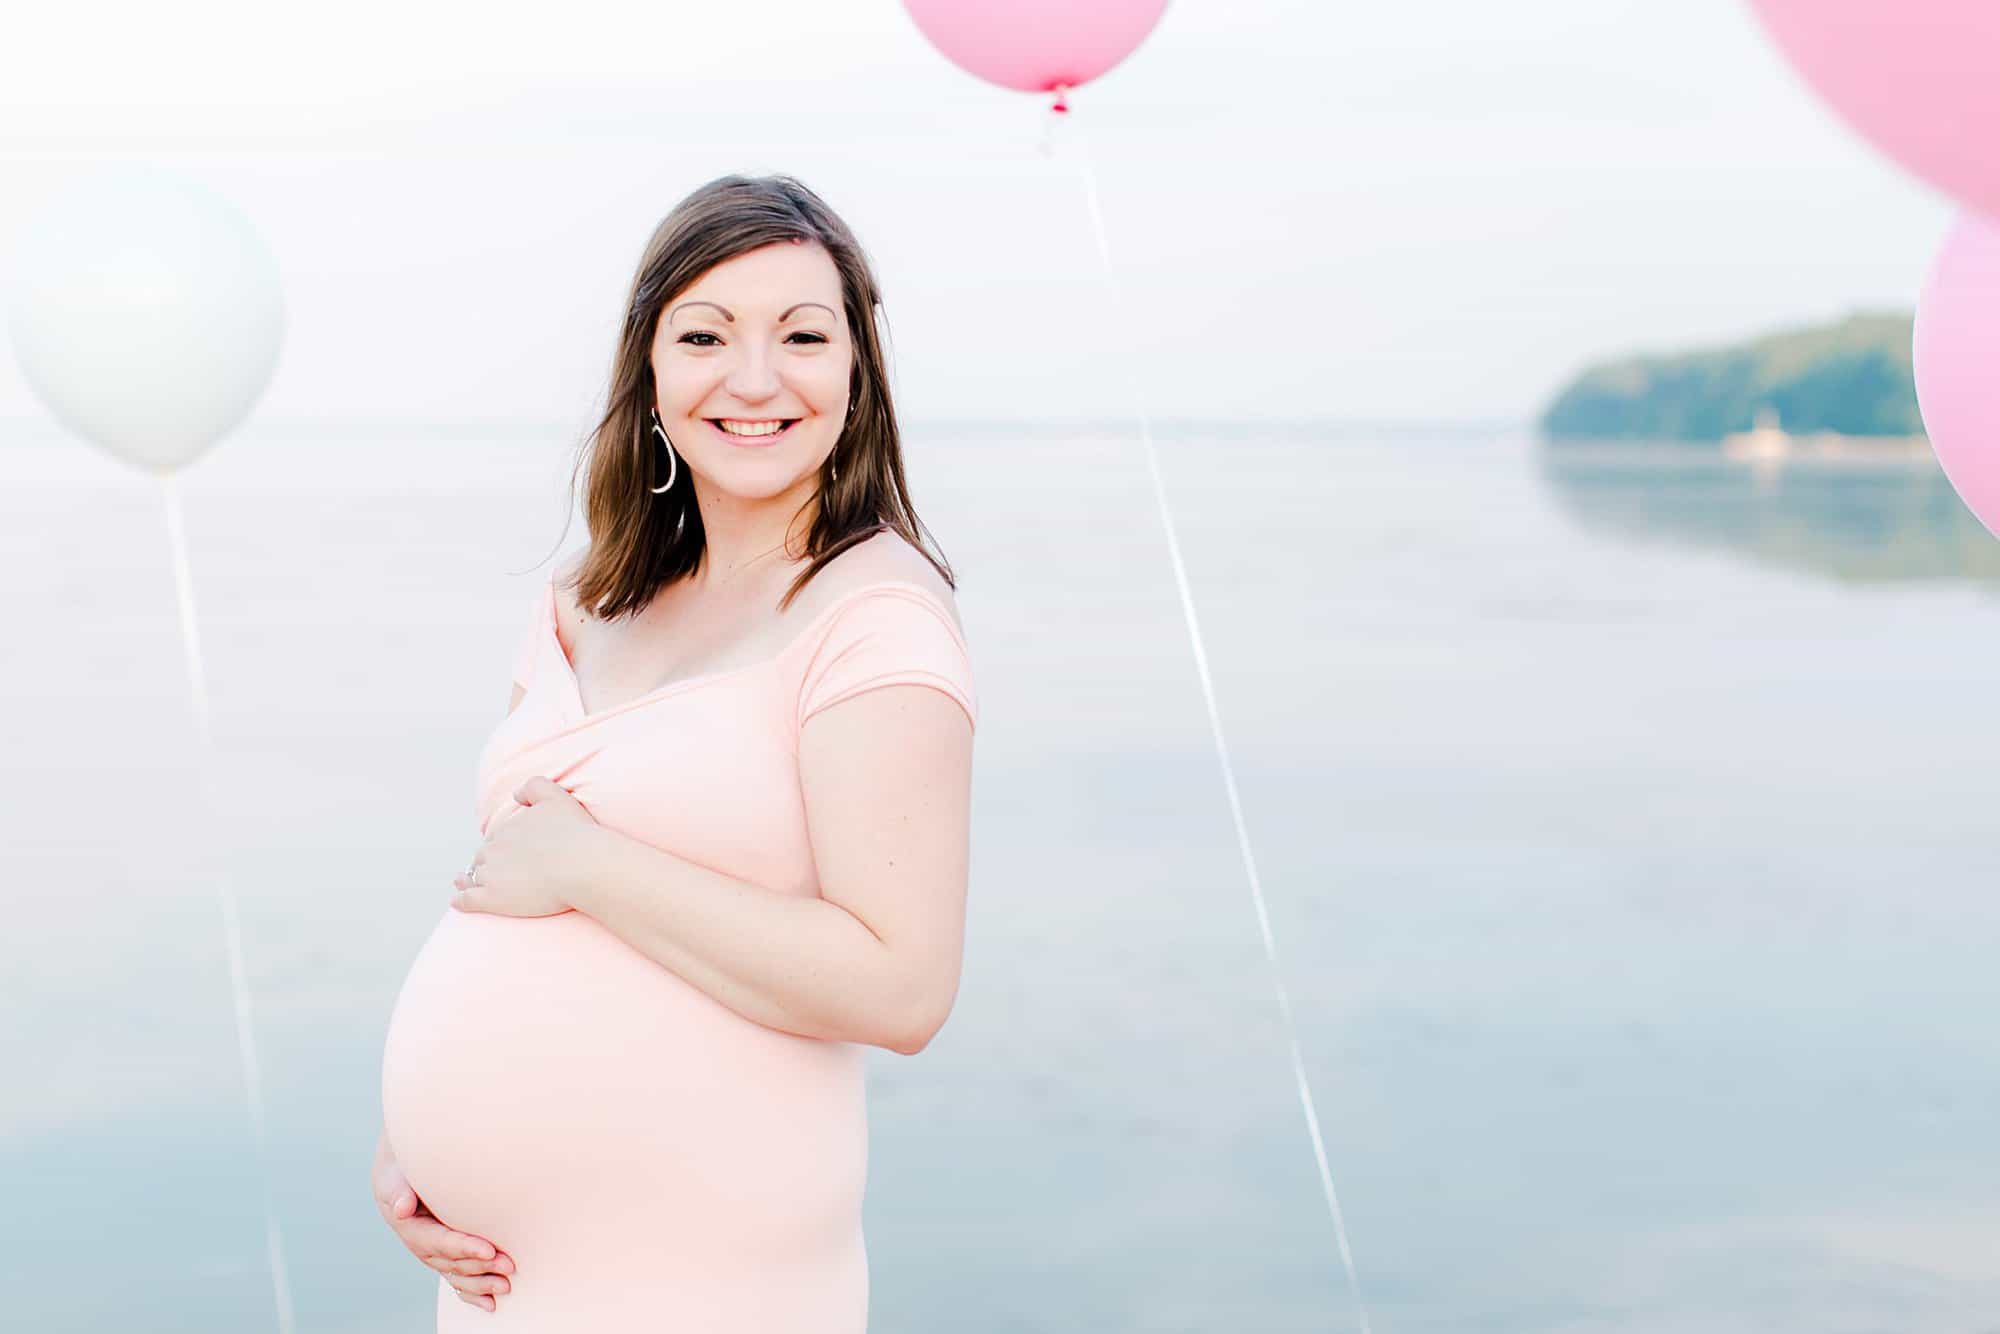 pregnant woman in tight peachy pink dress surrounded by pink and white balloons - What to Wear for Beach Maternity Photos | Maternity Photographer Miami